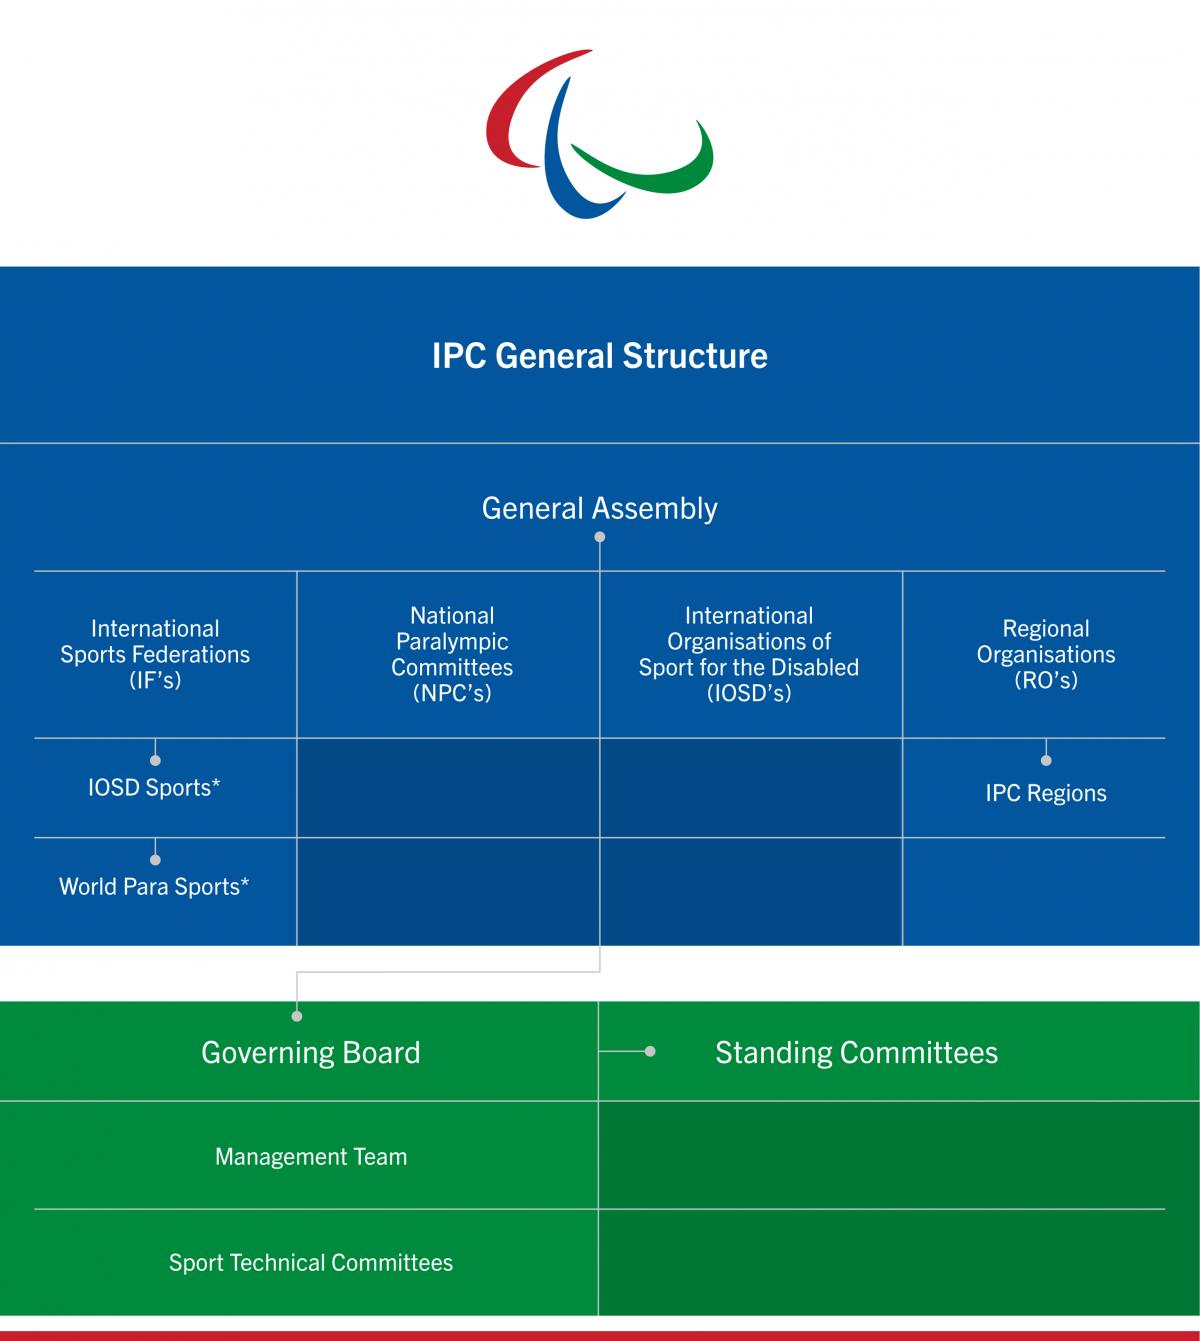 The structure of the IPC